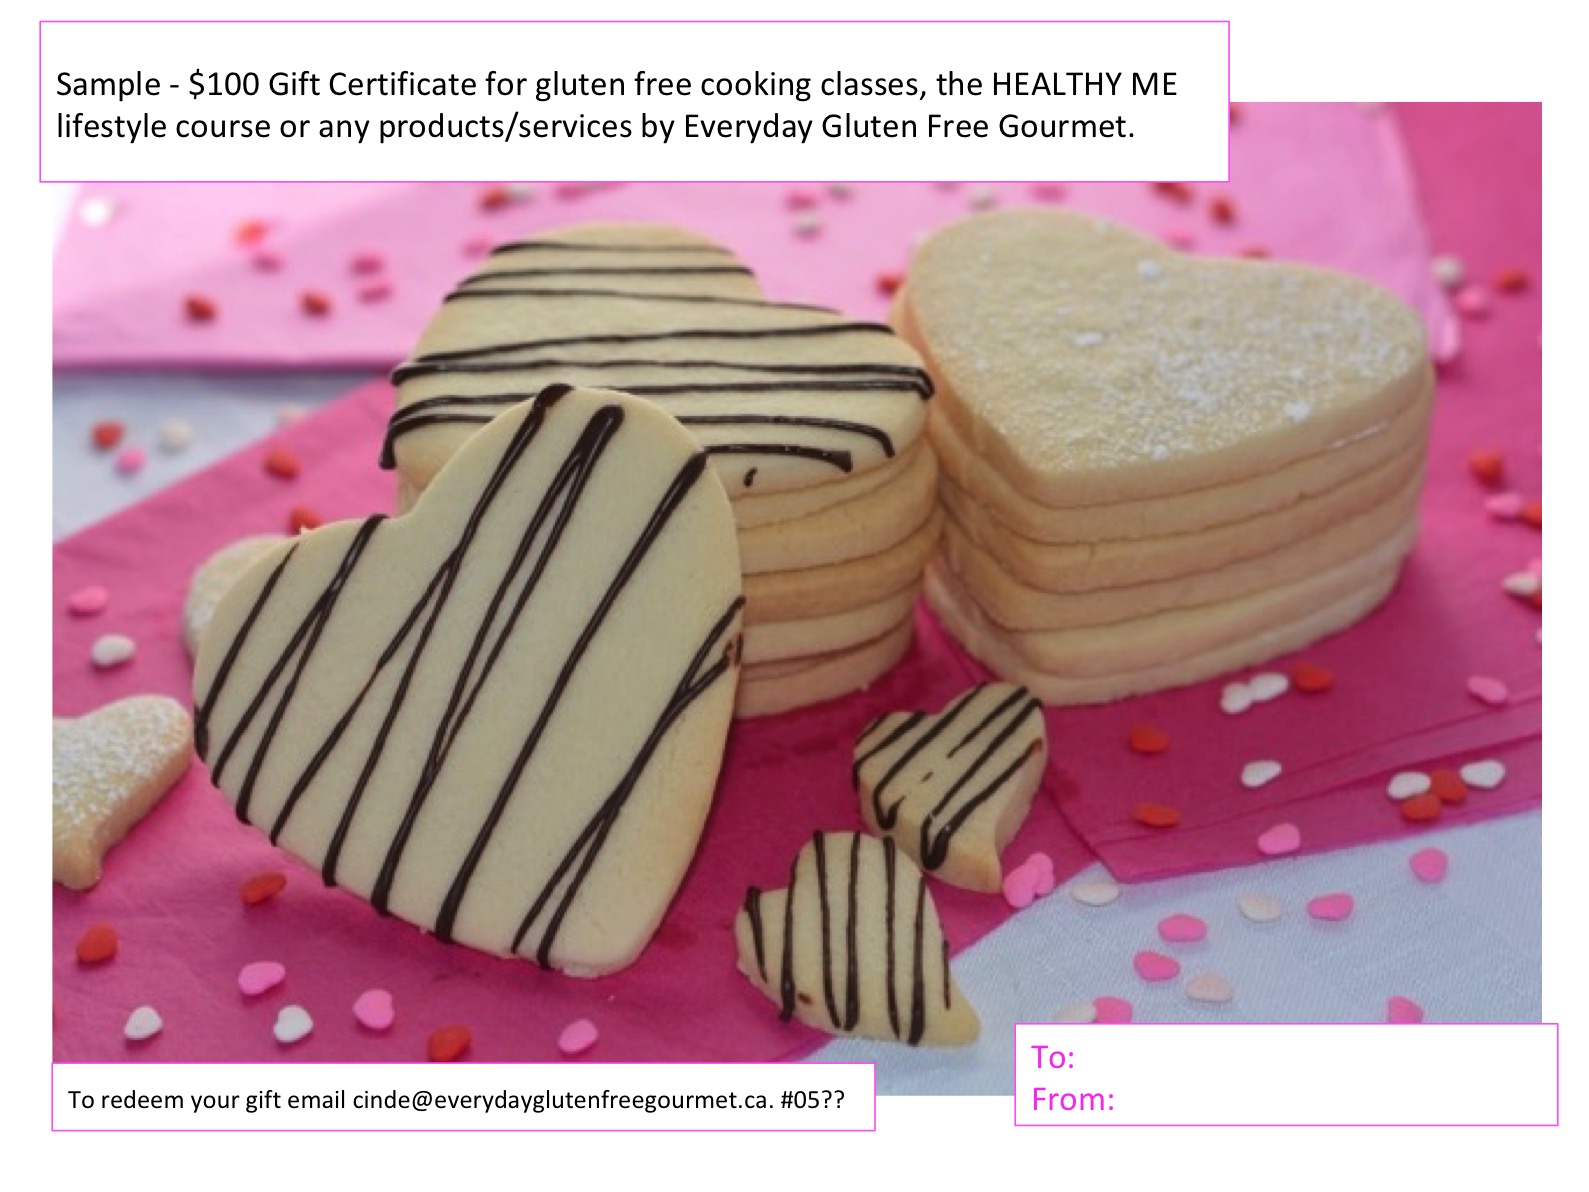 Sample Gift Certificate with hearts